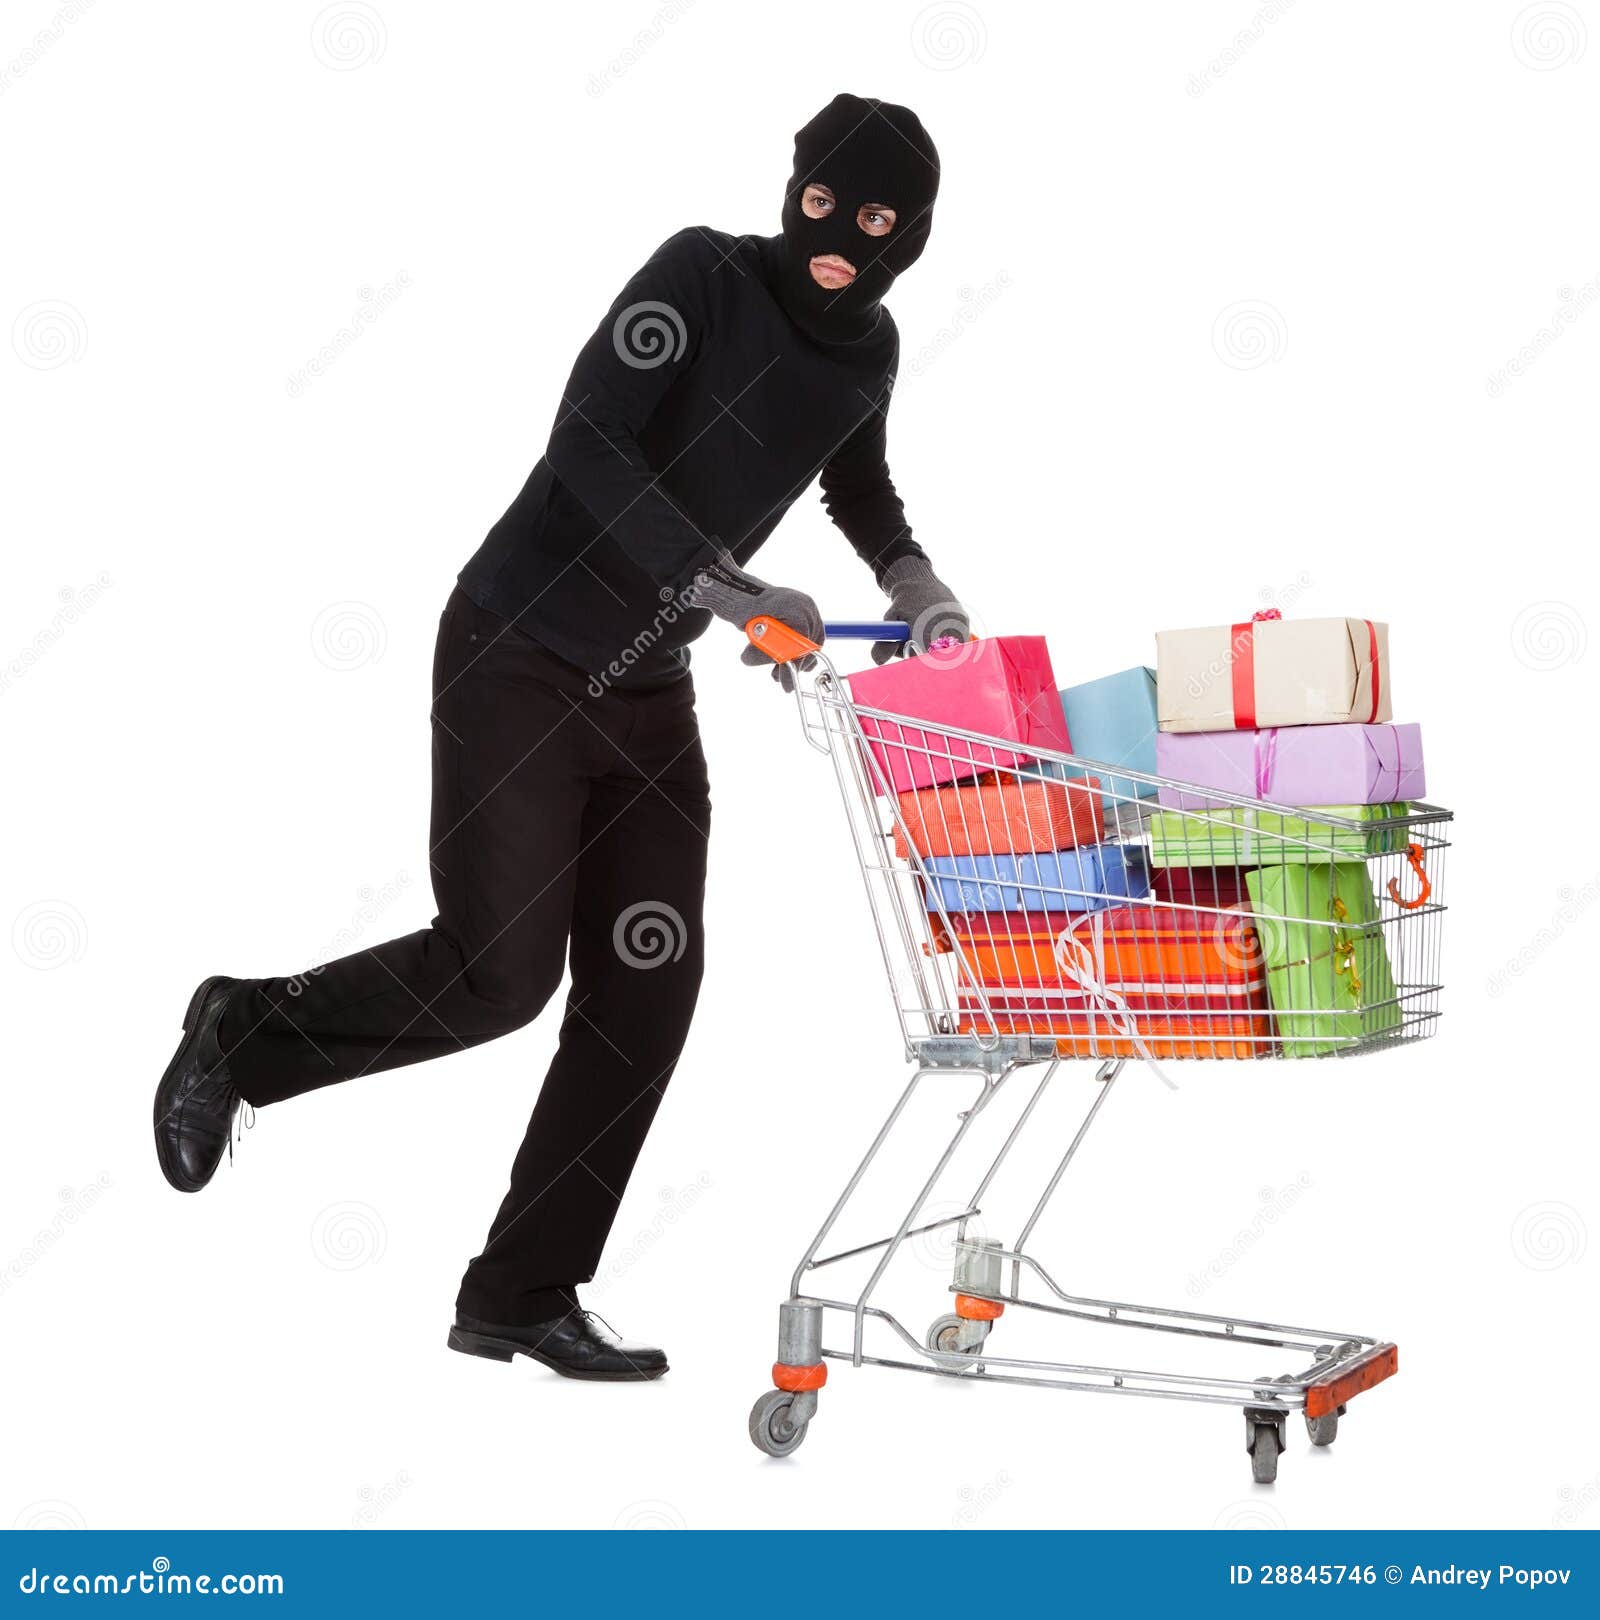 Thief Pushing A Trolley Of Gifts Stock Photo - Image: 28845746